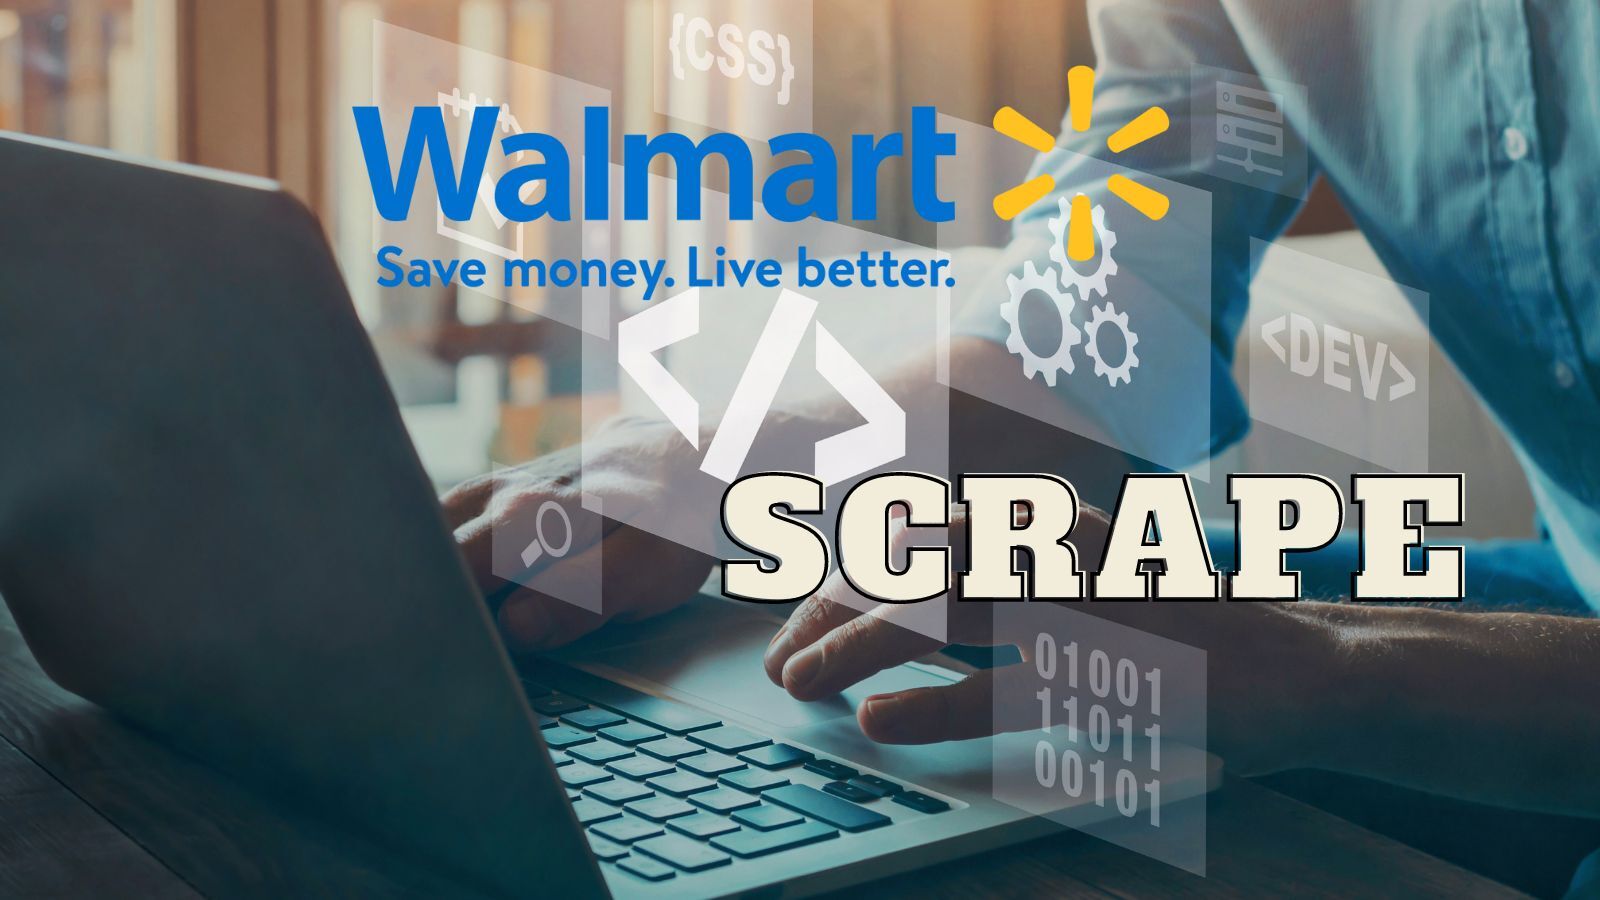 A Guide to Scraping Walmart Product Data: Coding and No-Code Methods